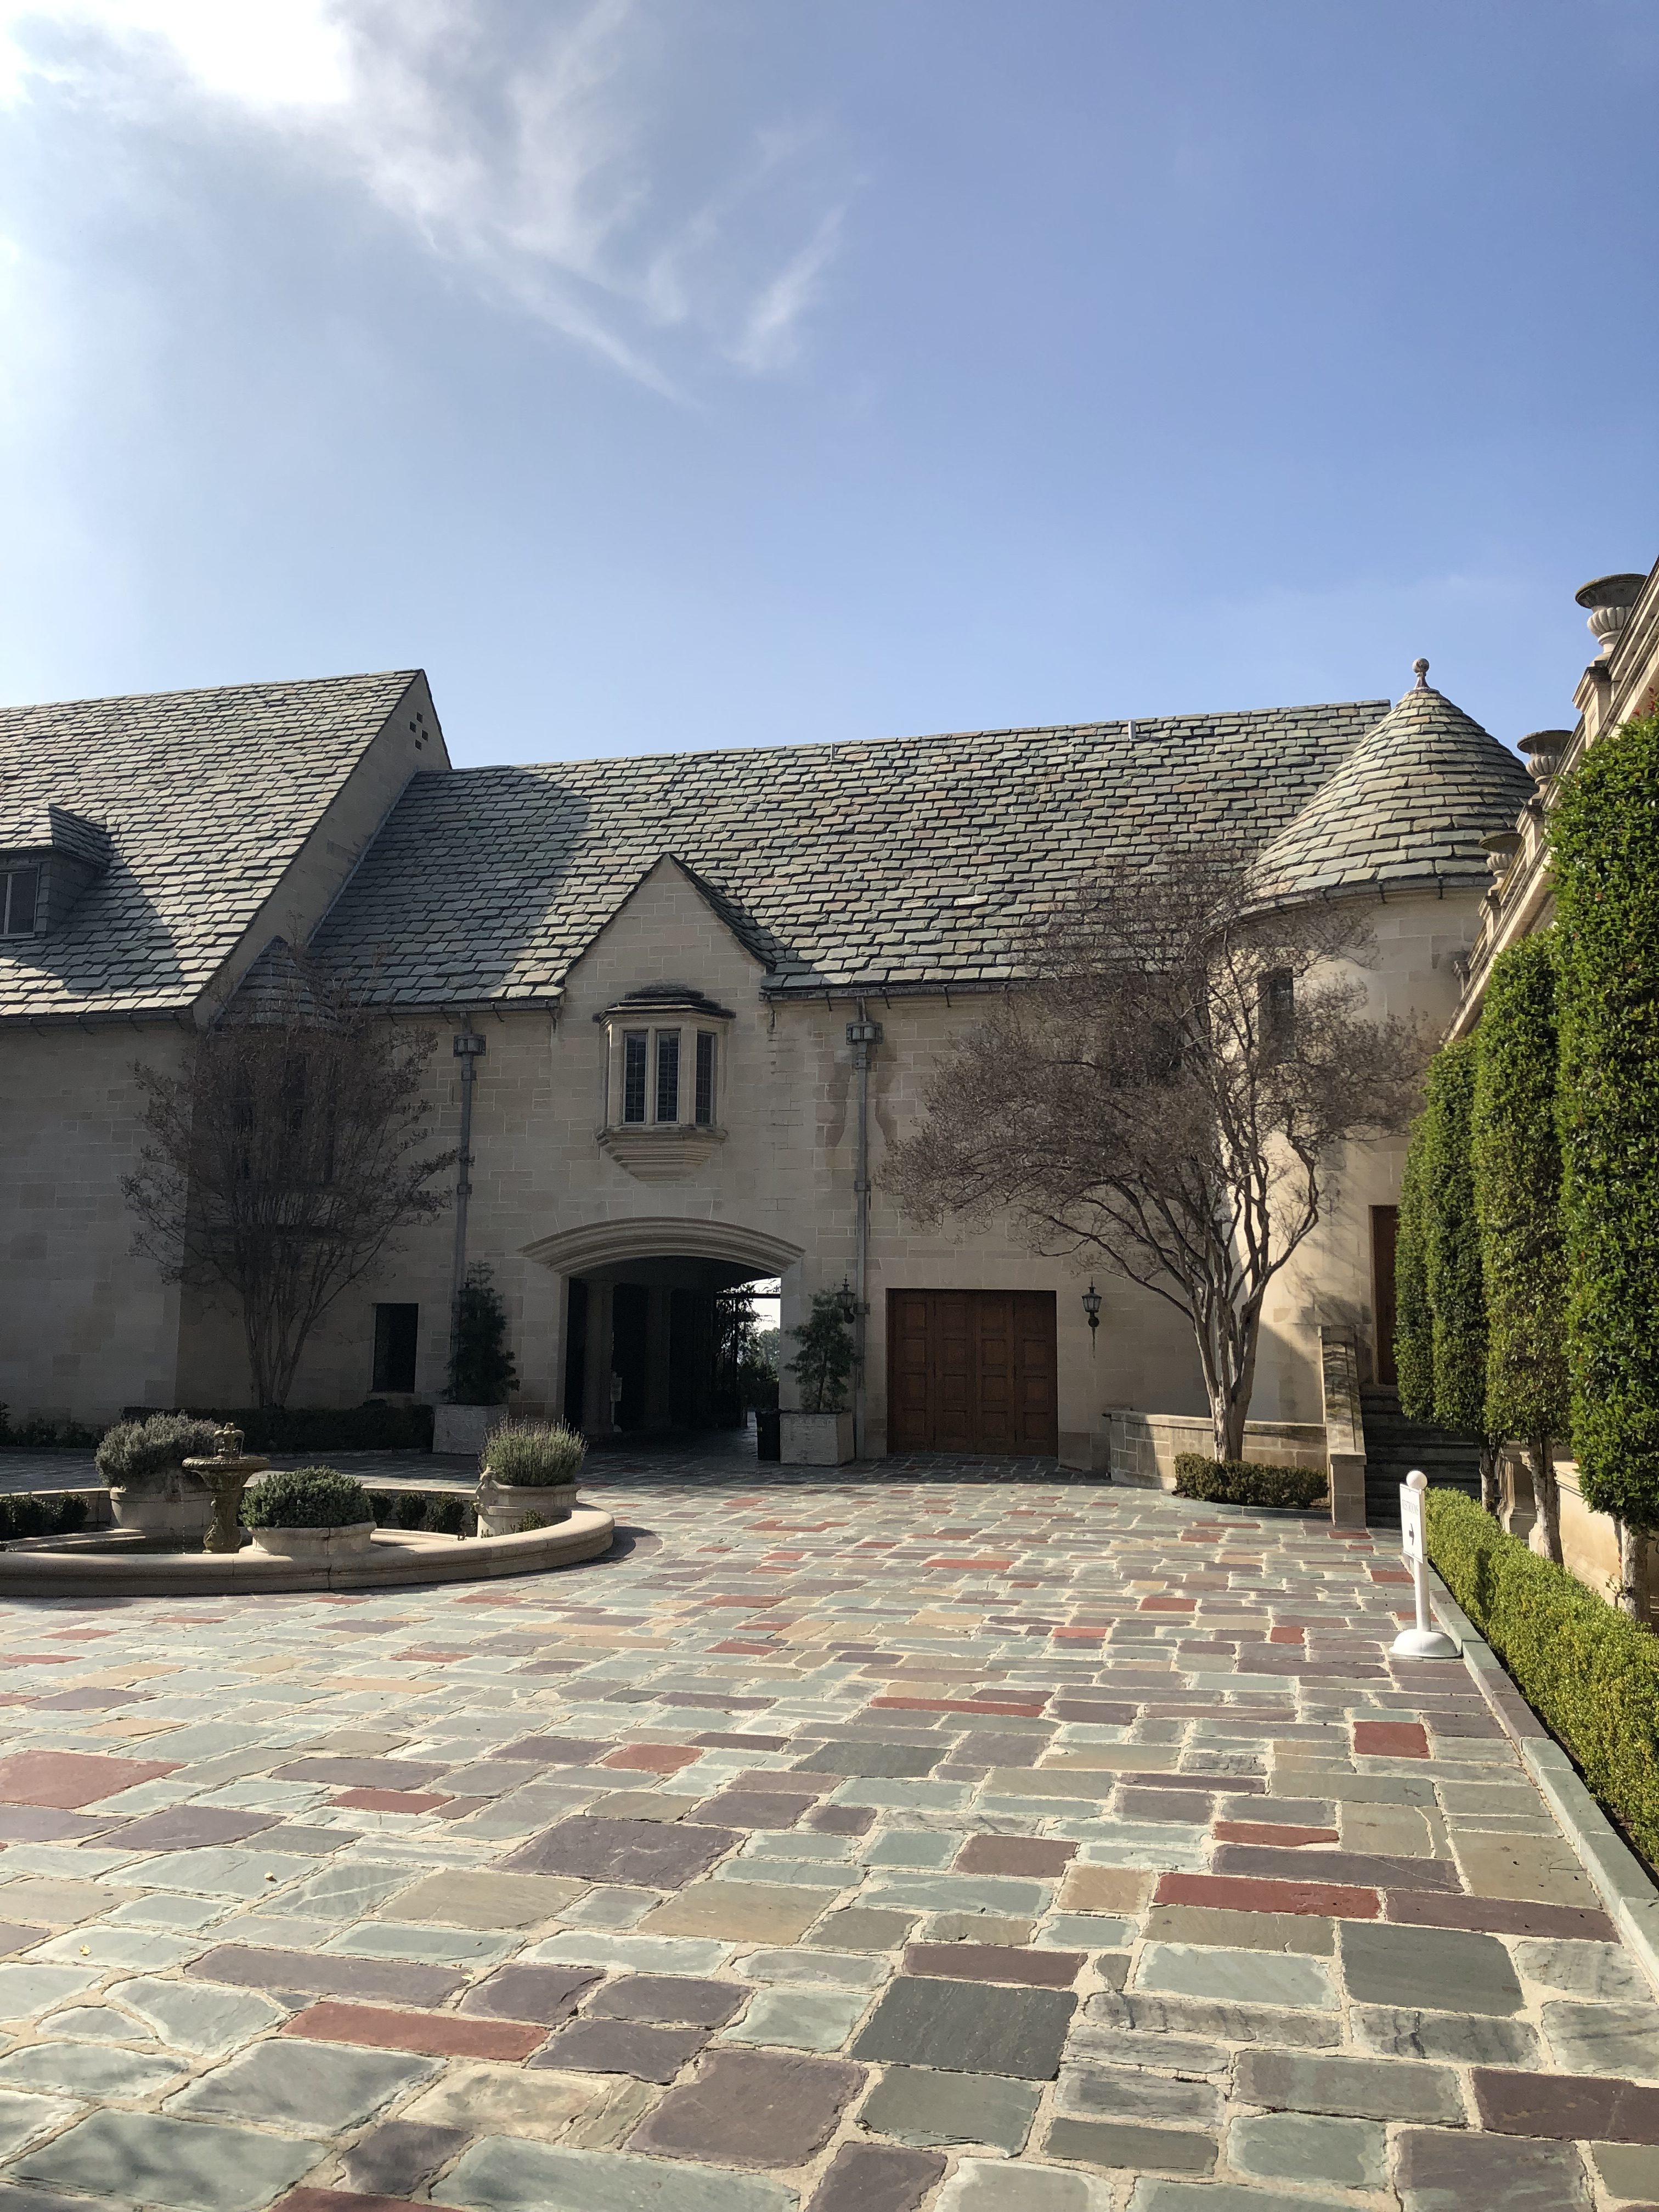 MEMA SoCal’s First Meeting of the Year at the Greystone Mansion